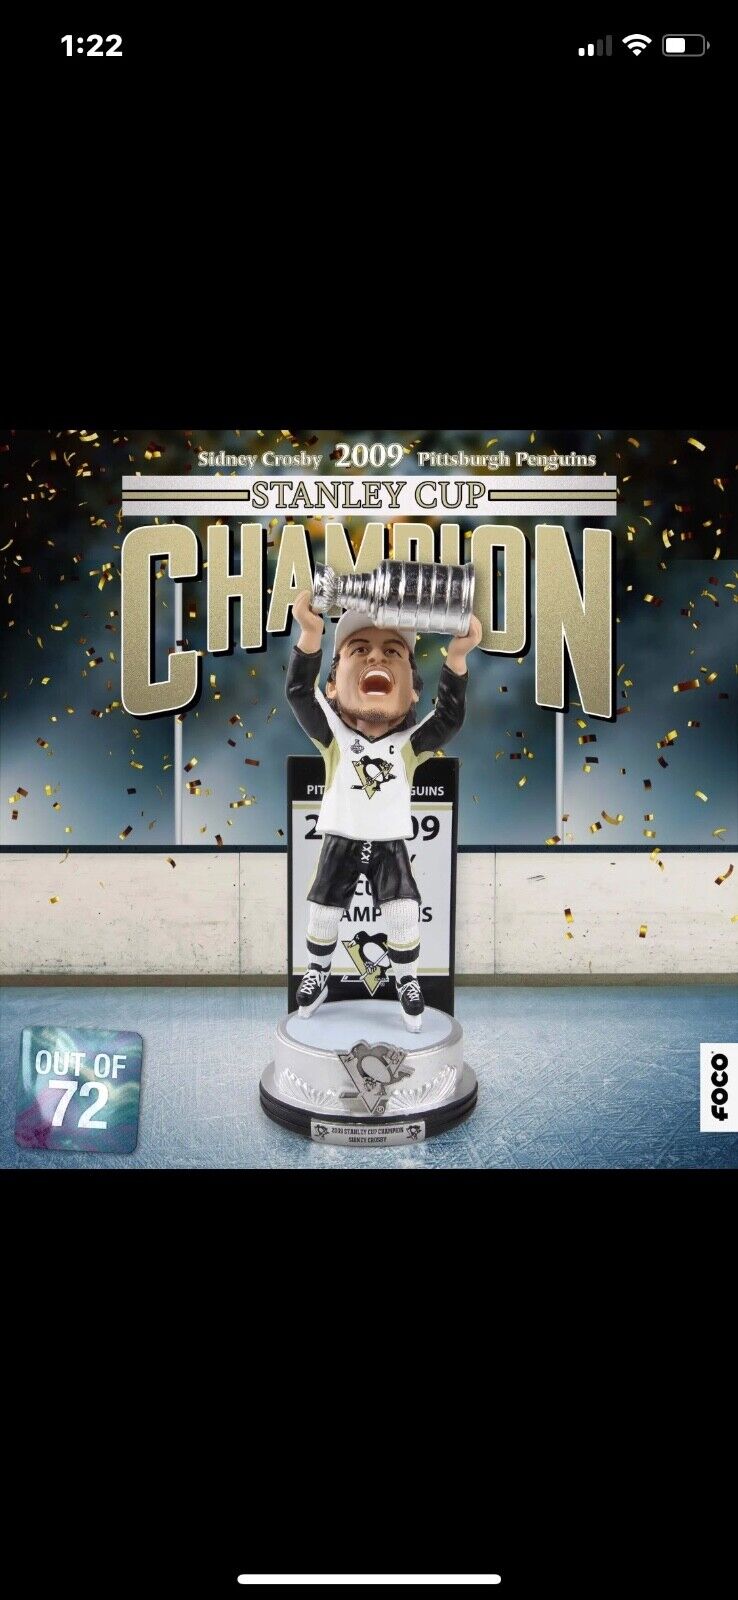 SIDNEY Crosby FOCO Bobblehead 59/72 Pittsburgh PENGUINS 2009 Stanley CUP